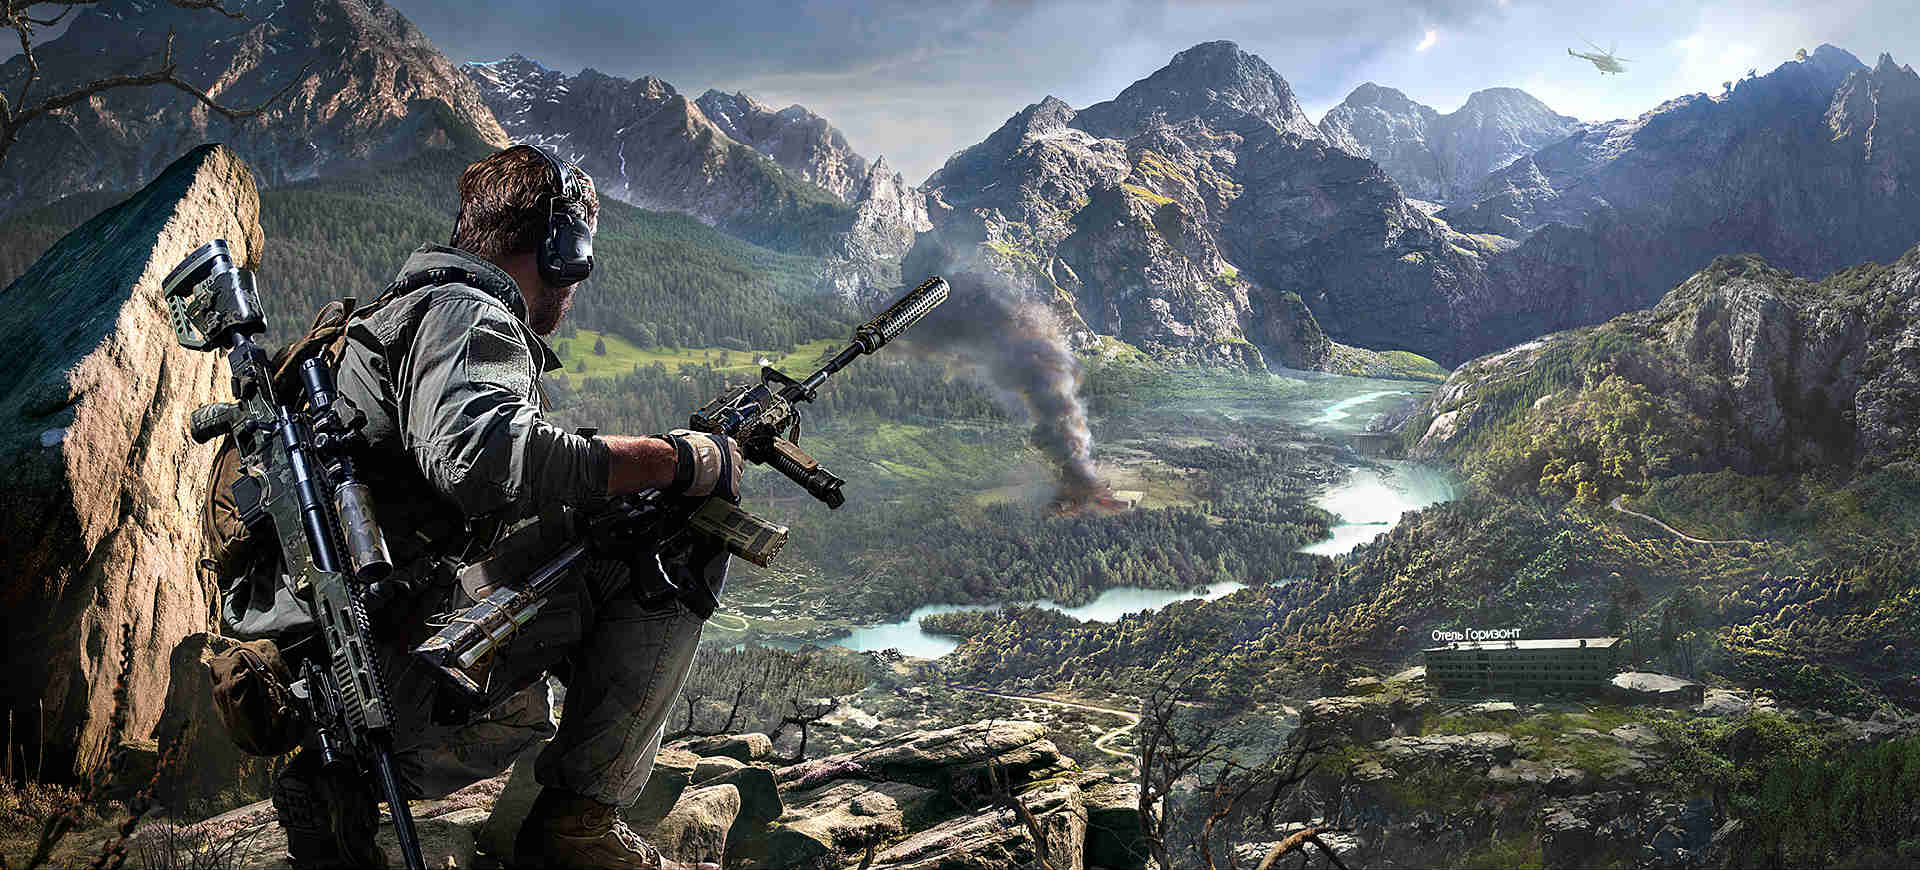 Sniper Ghost Warrior 3 Difficulty Levels